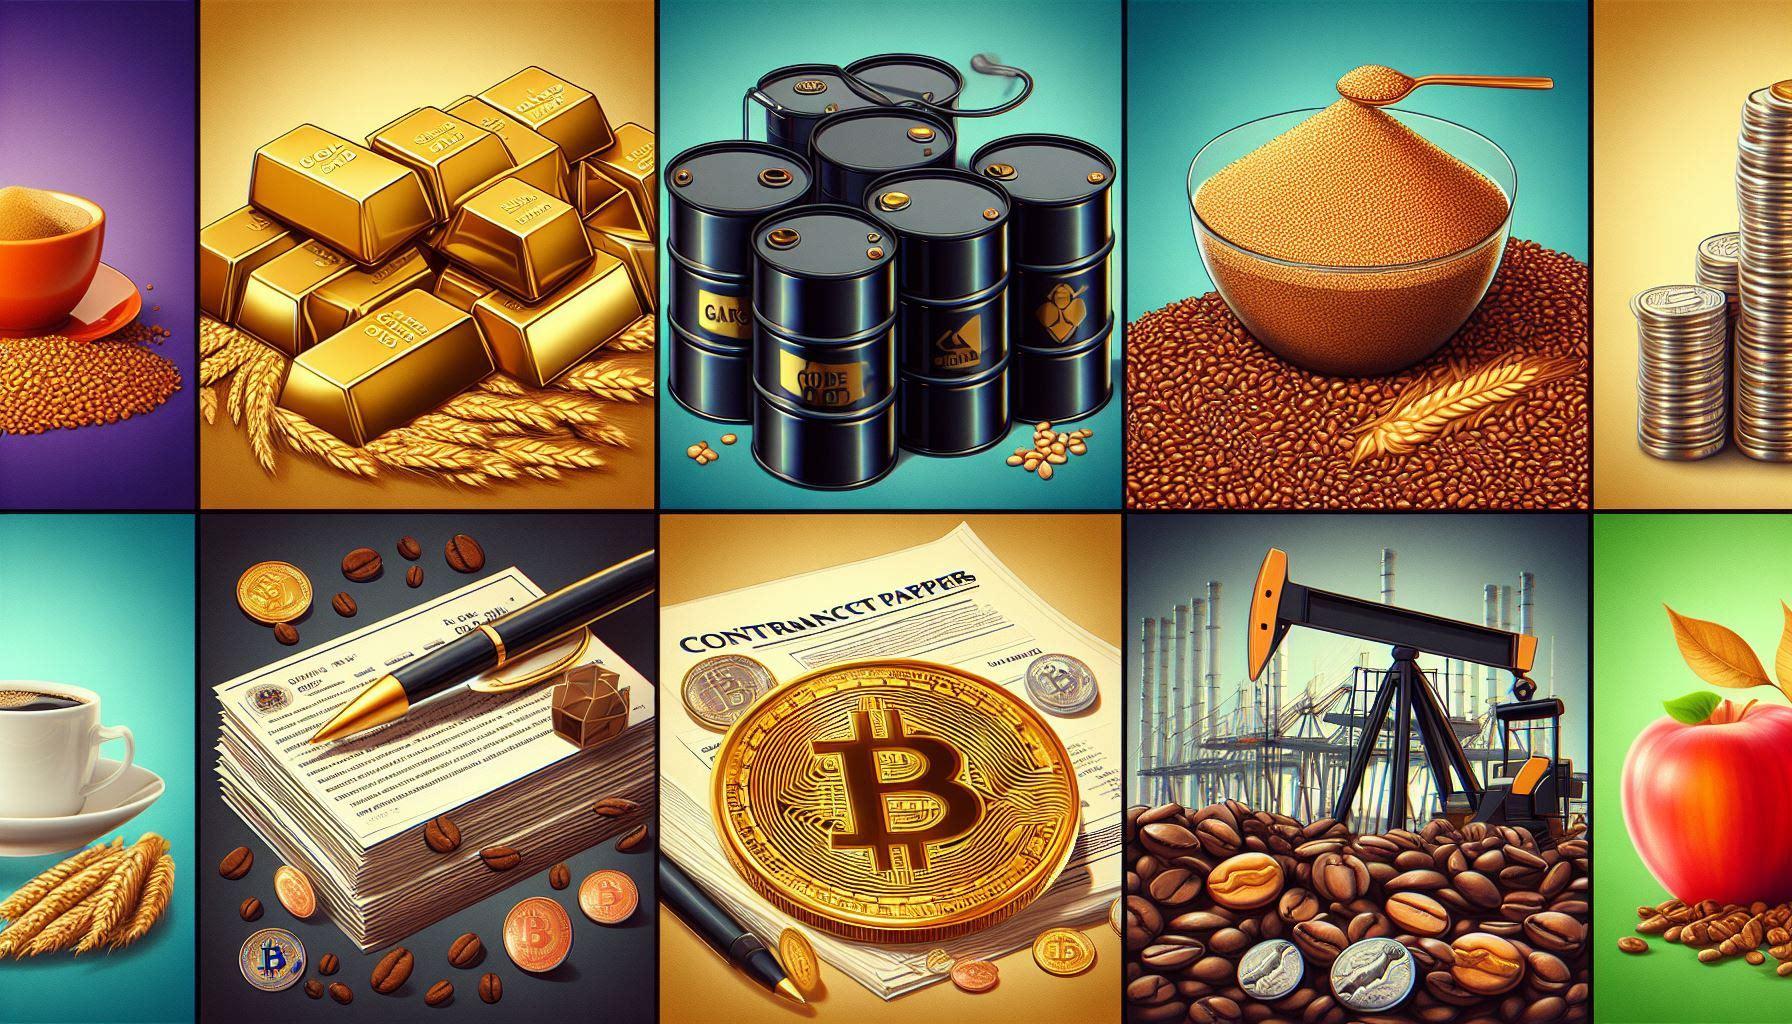 Types of commodity in commodity market